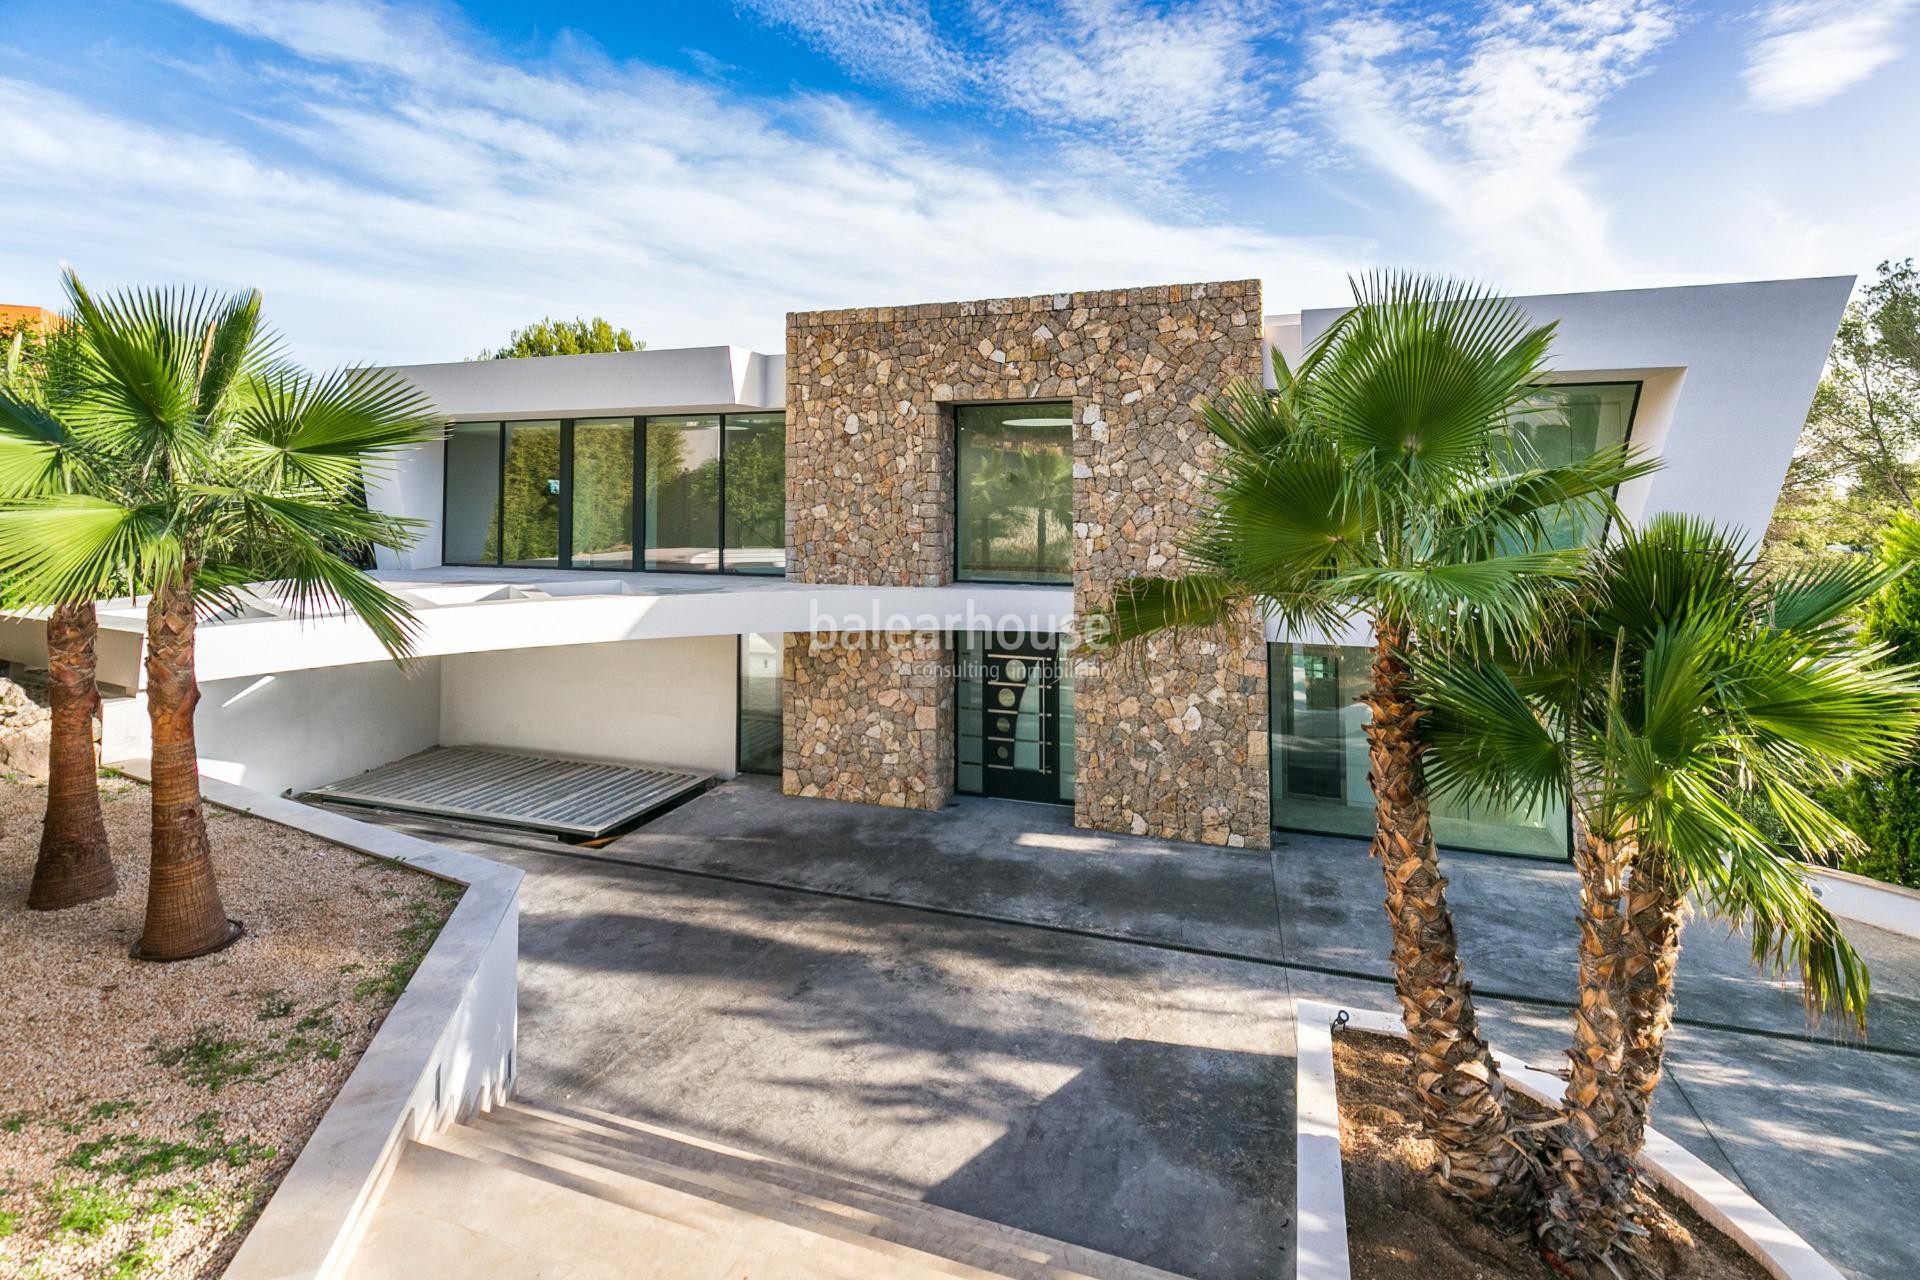 Spectacular modern design villa in front line and with direct access to the sea in Cala Vinyas